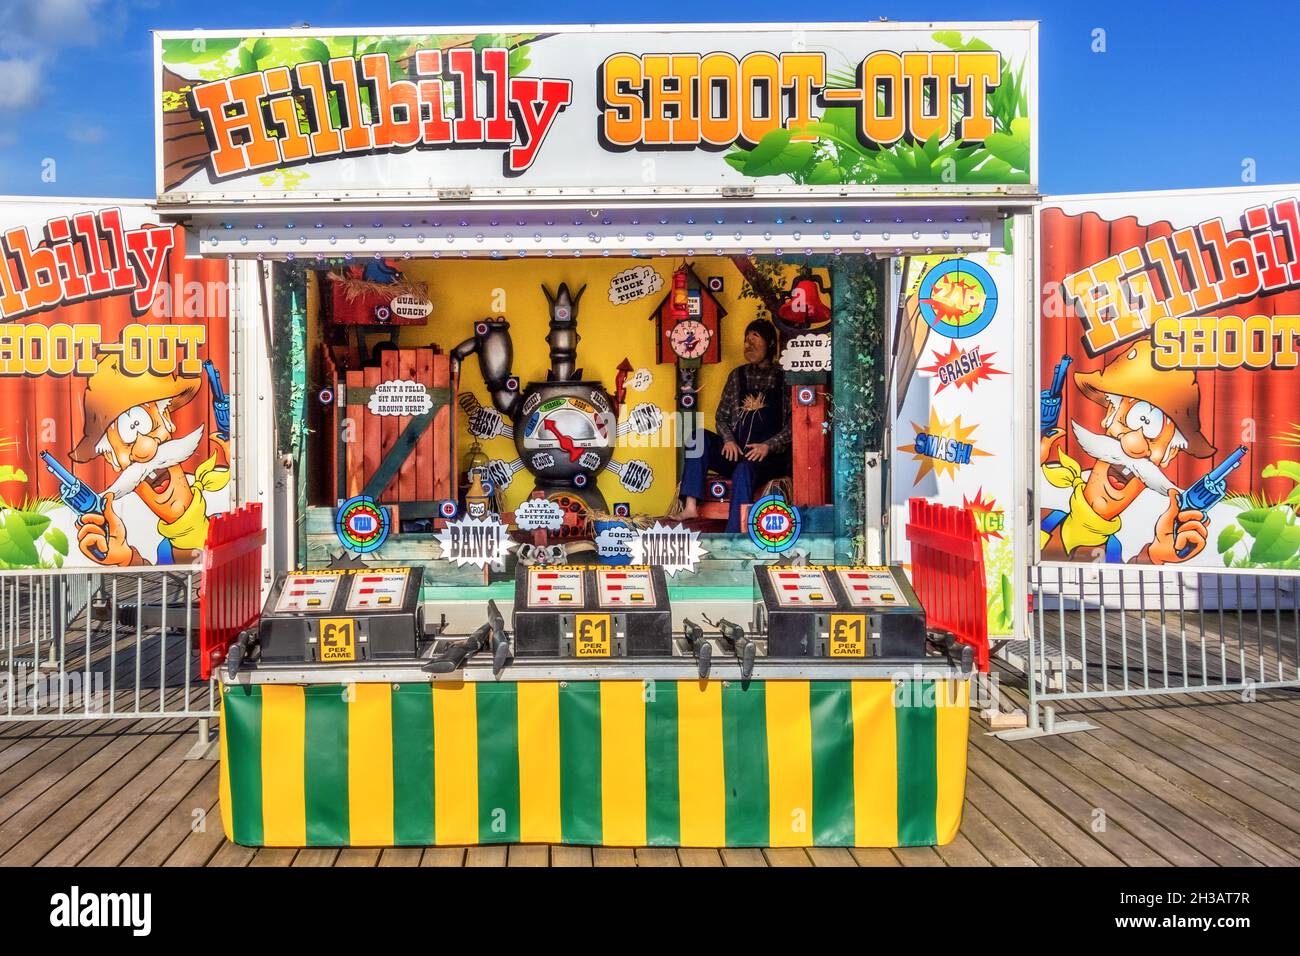 Hillbilly Shoot-Out, shooting gallery, Hastings pier amusement park Stock Photo